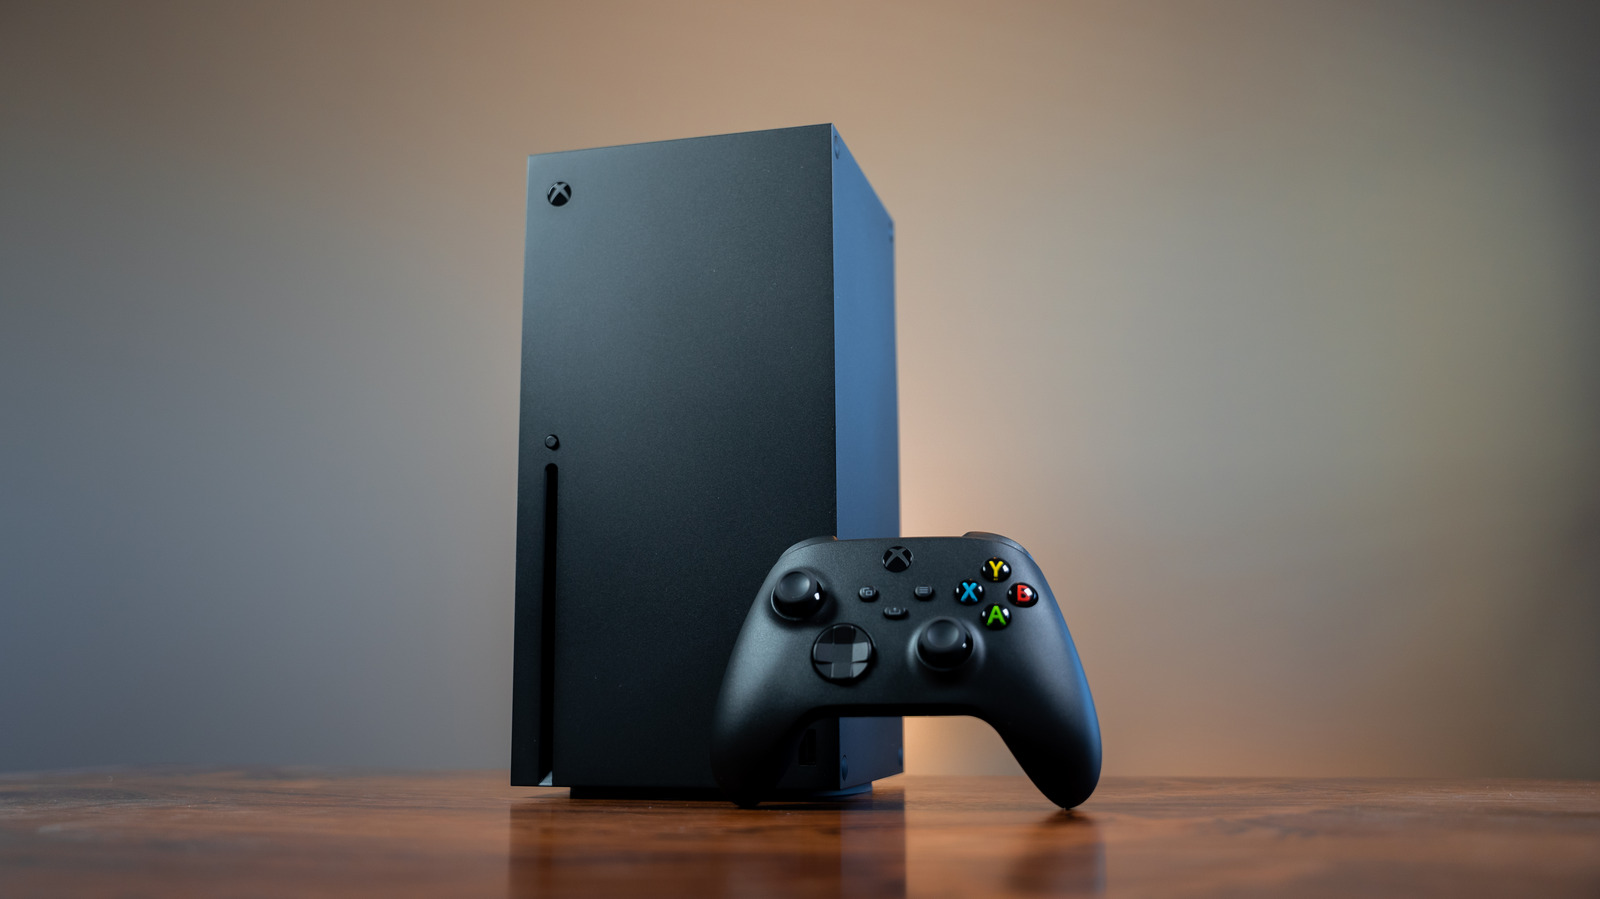 Xbox is recovering after the second of two outages this weekend